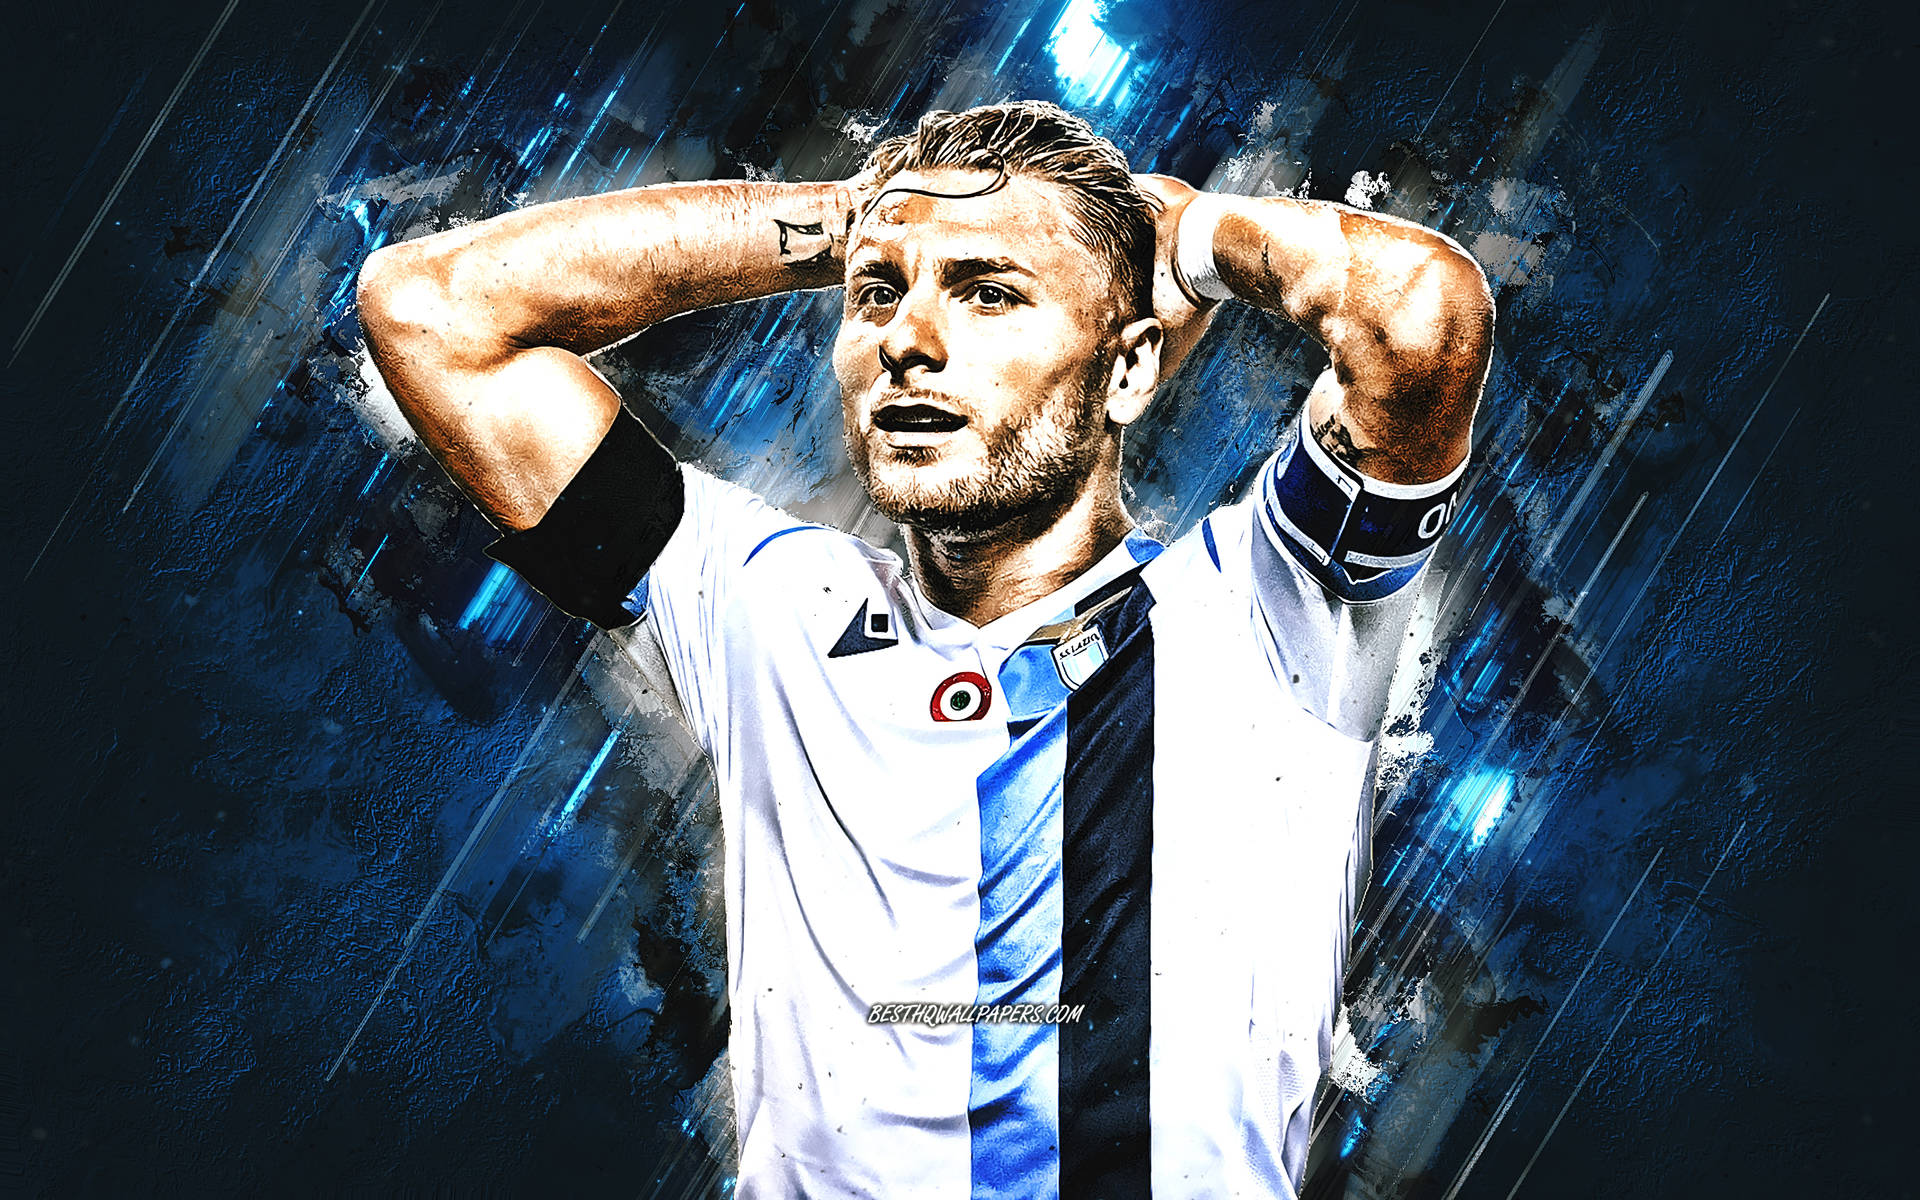 Football Prodigy Ciro Immobile In Action